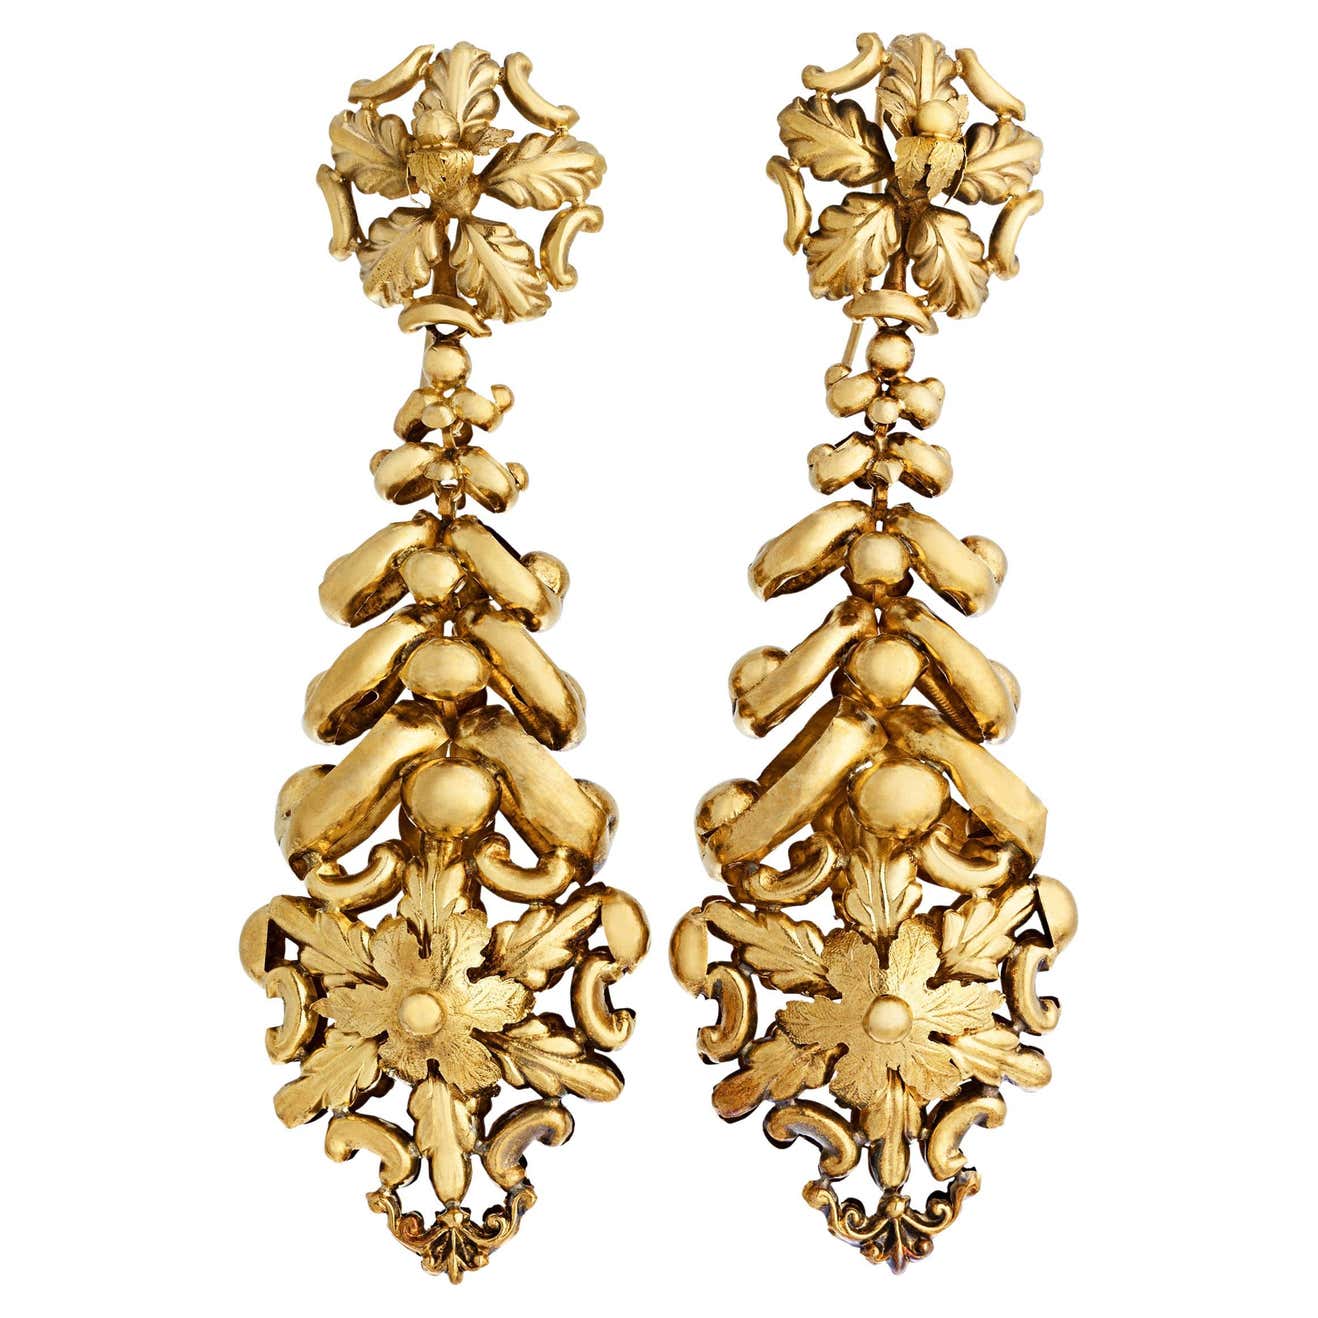 Vivien Leigh's Earrings From Caesar and Cleopatra For Sale at 1stDibs